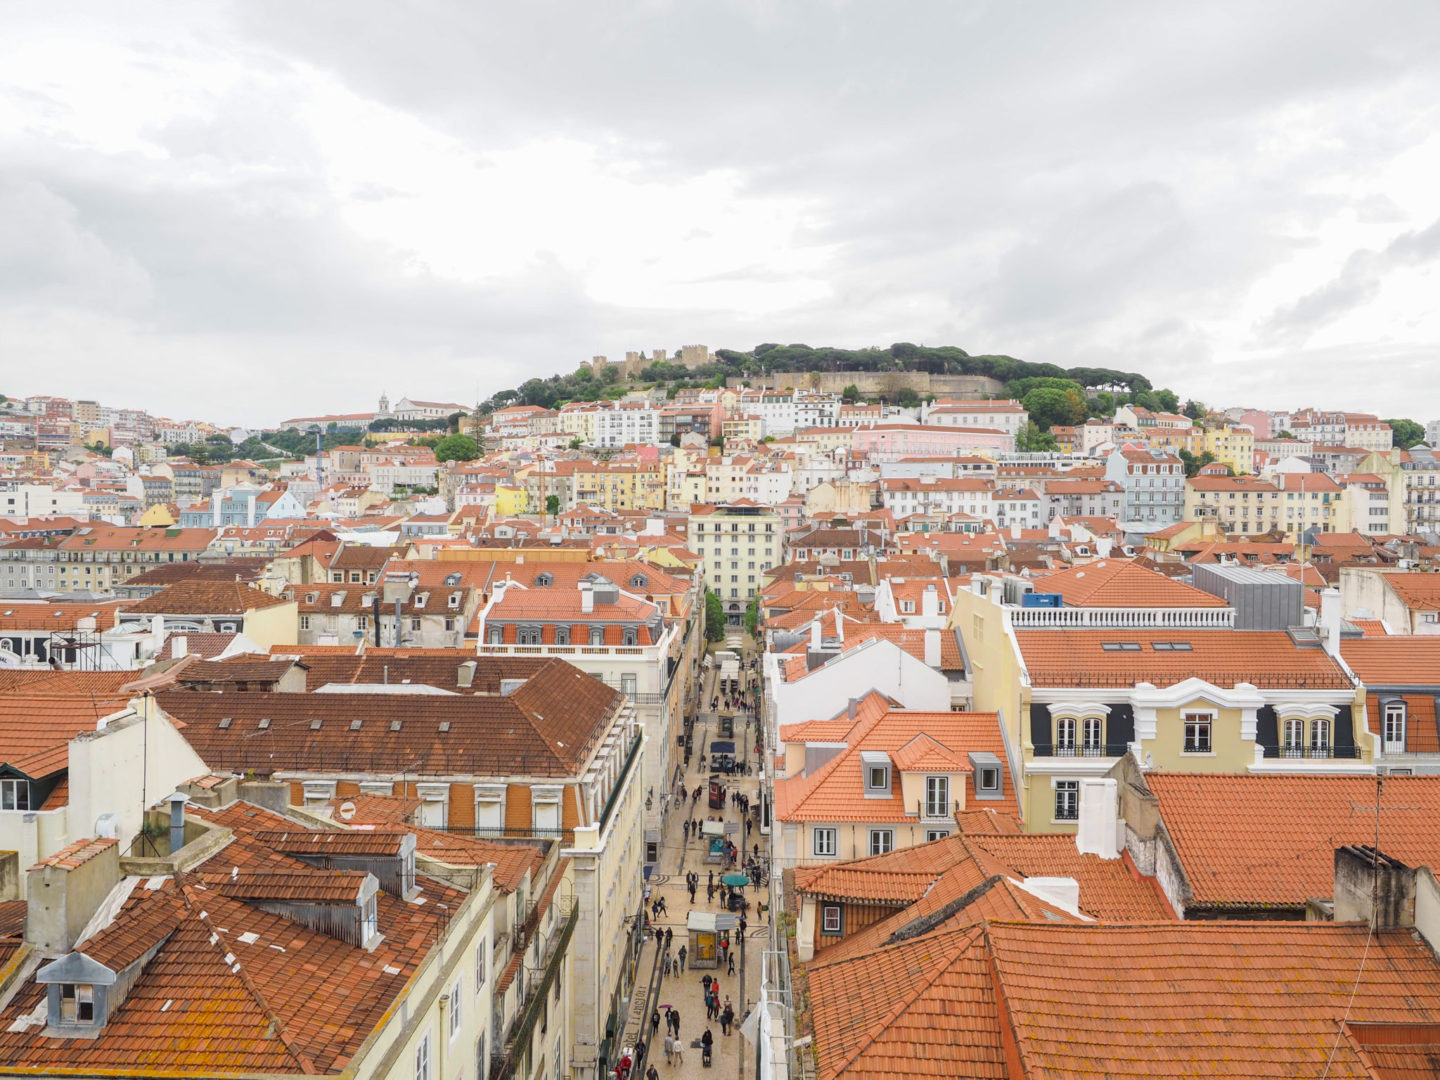 One day in Lisbon